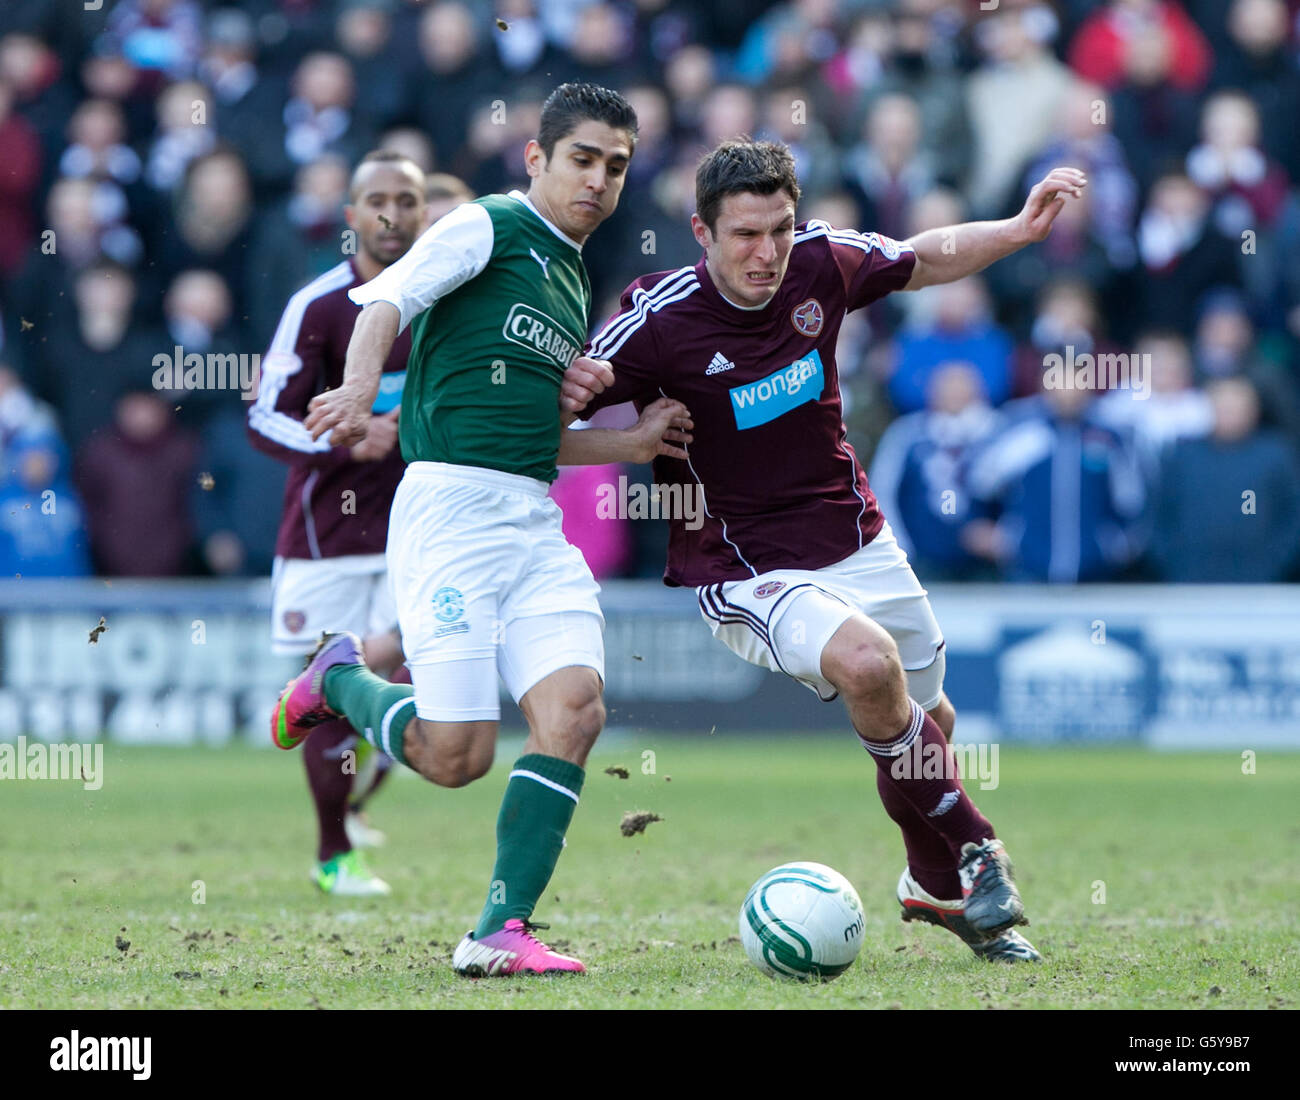 Hibernian's Jorge Claros vies for the ball with Heart of Midlothian's John Sutton (centre) during the Clydesdale Bank Scottish Premier League match at Easter Road, Edinburgh. Stock Photo